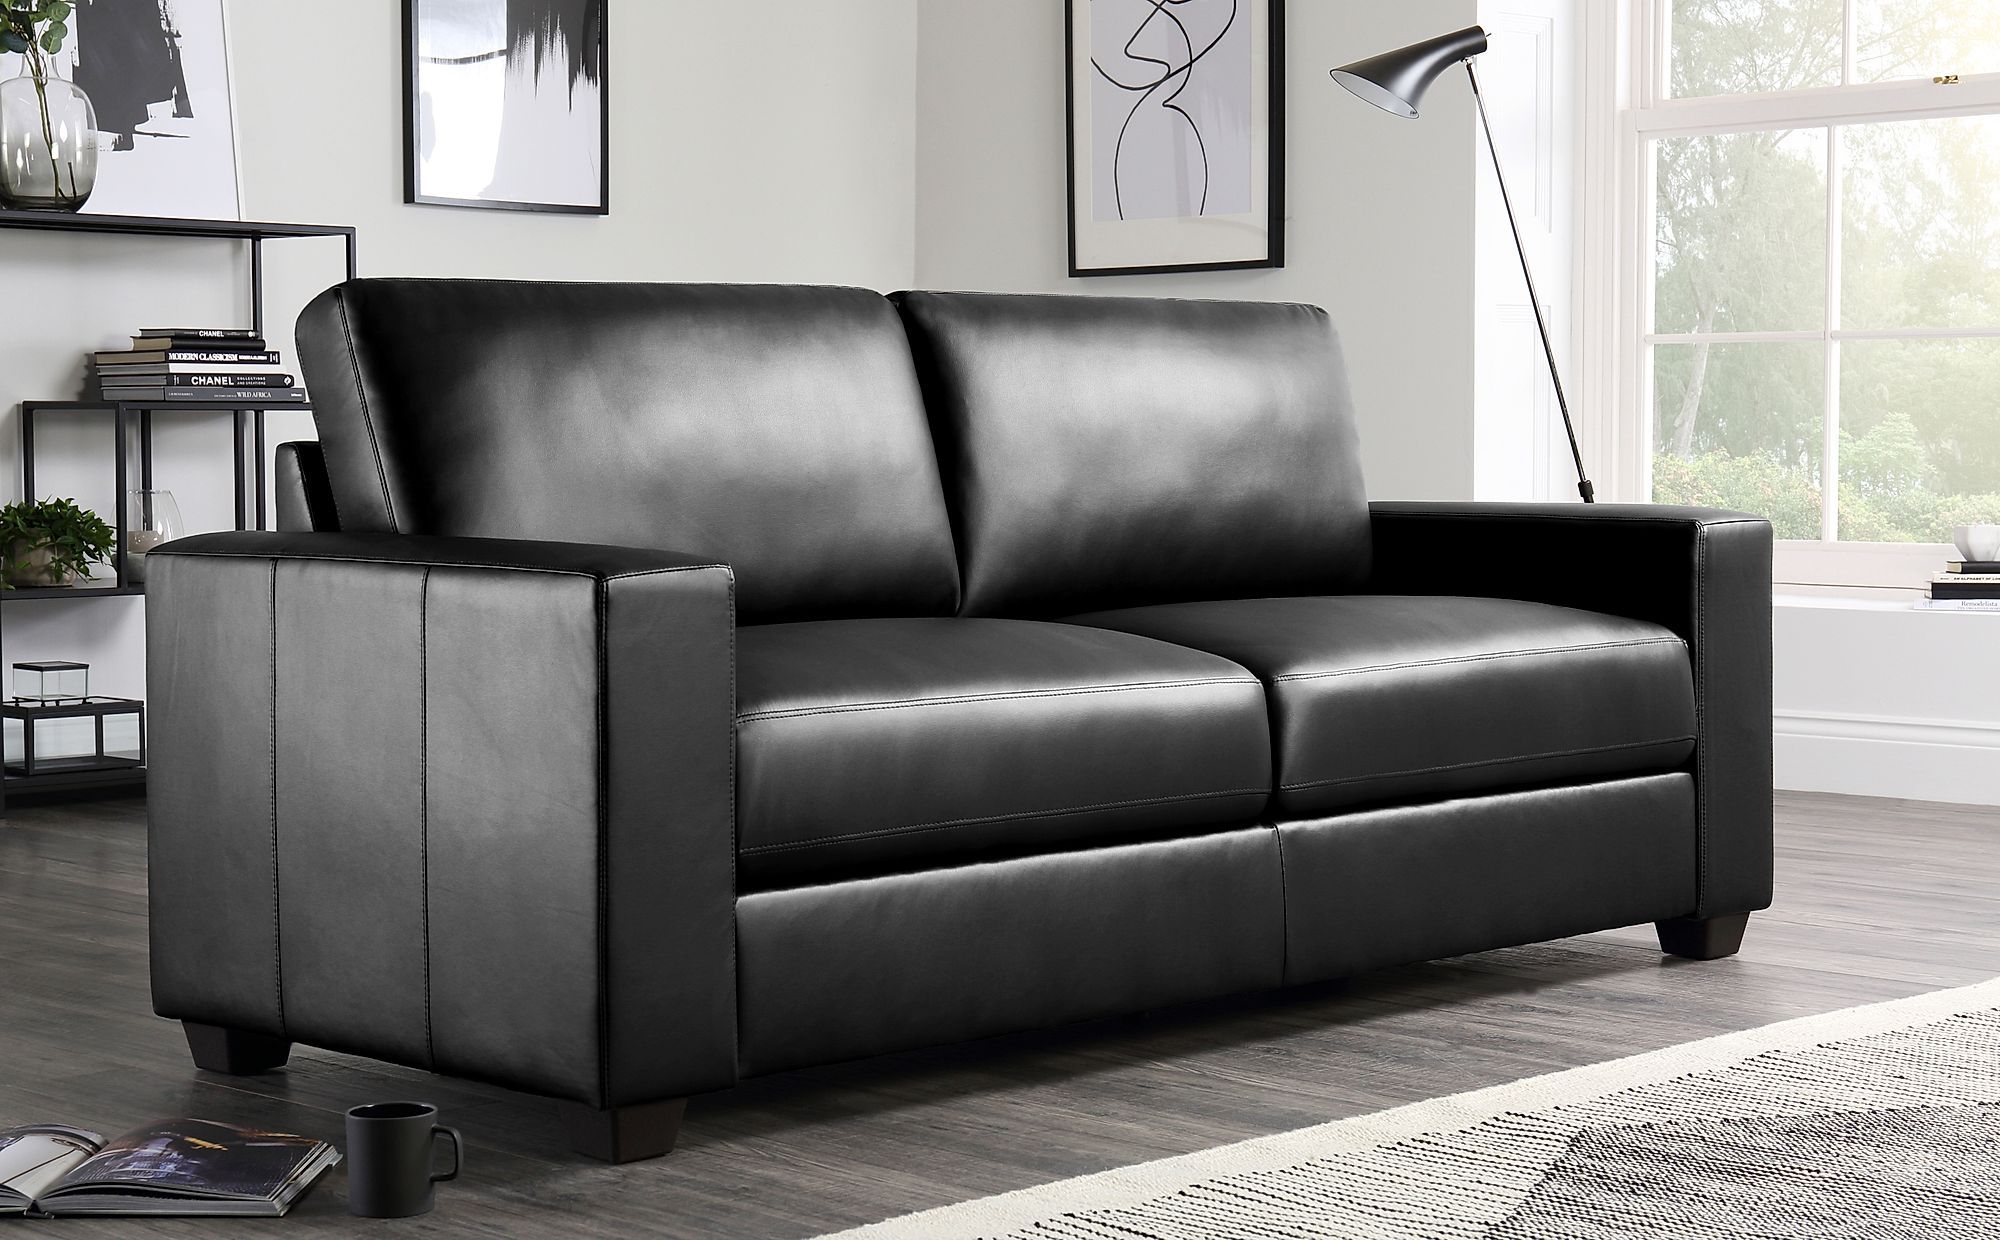 Black Leather 3 Seater – The Arched Arms Look Great On This Sofa Suite. Pertaining To Sofas In Black (Gallery 7 of 20)